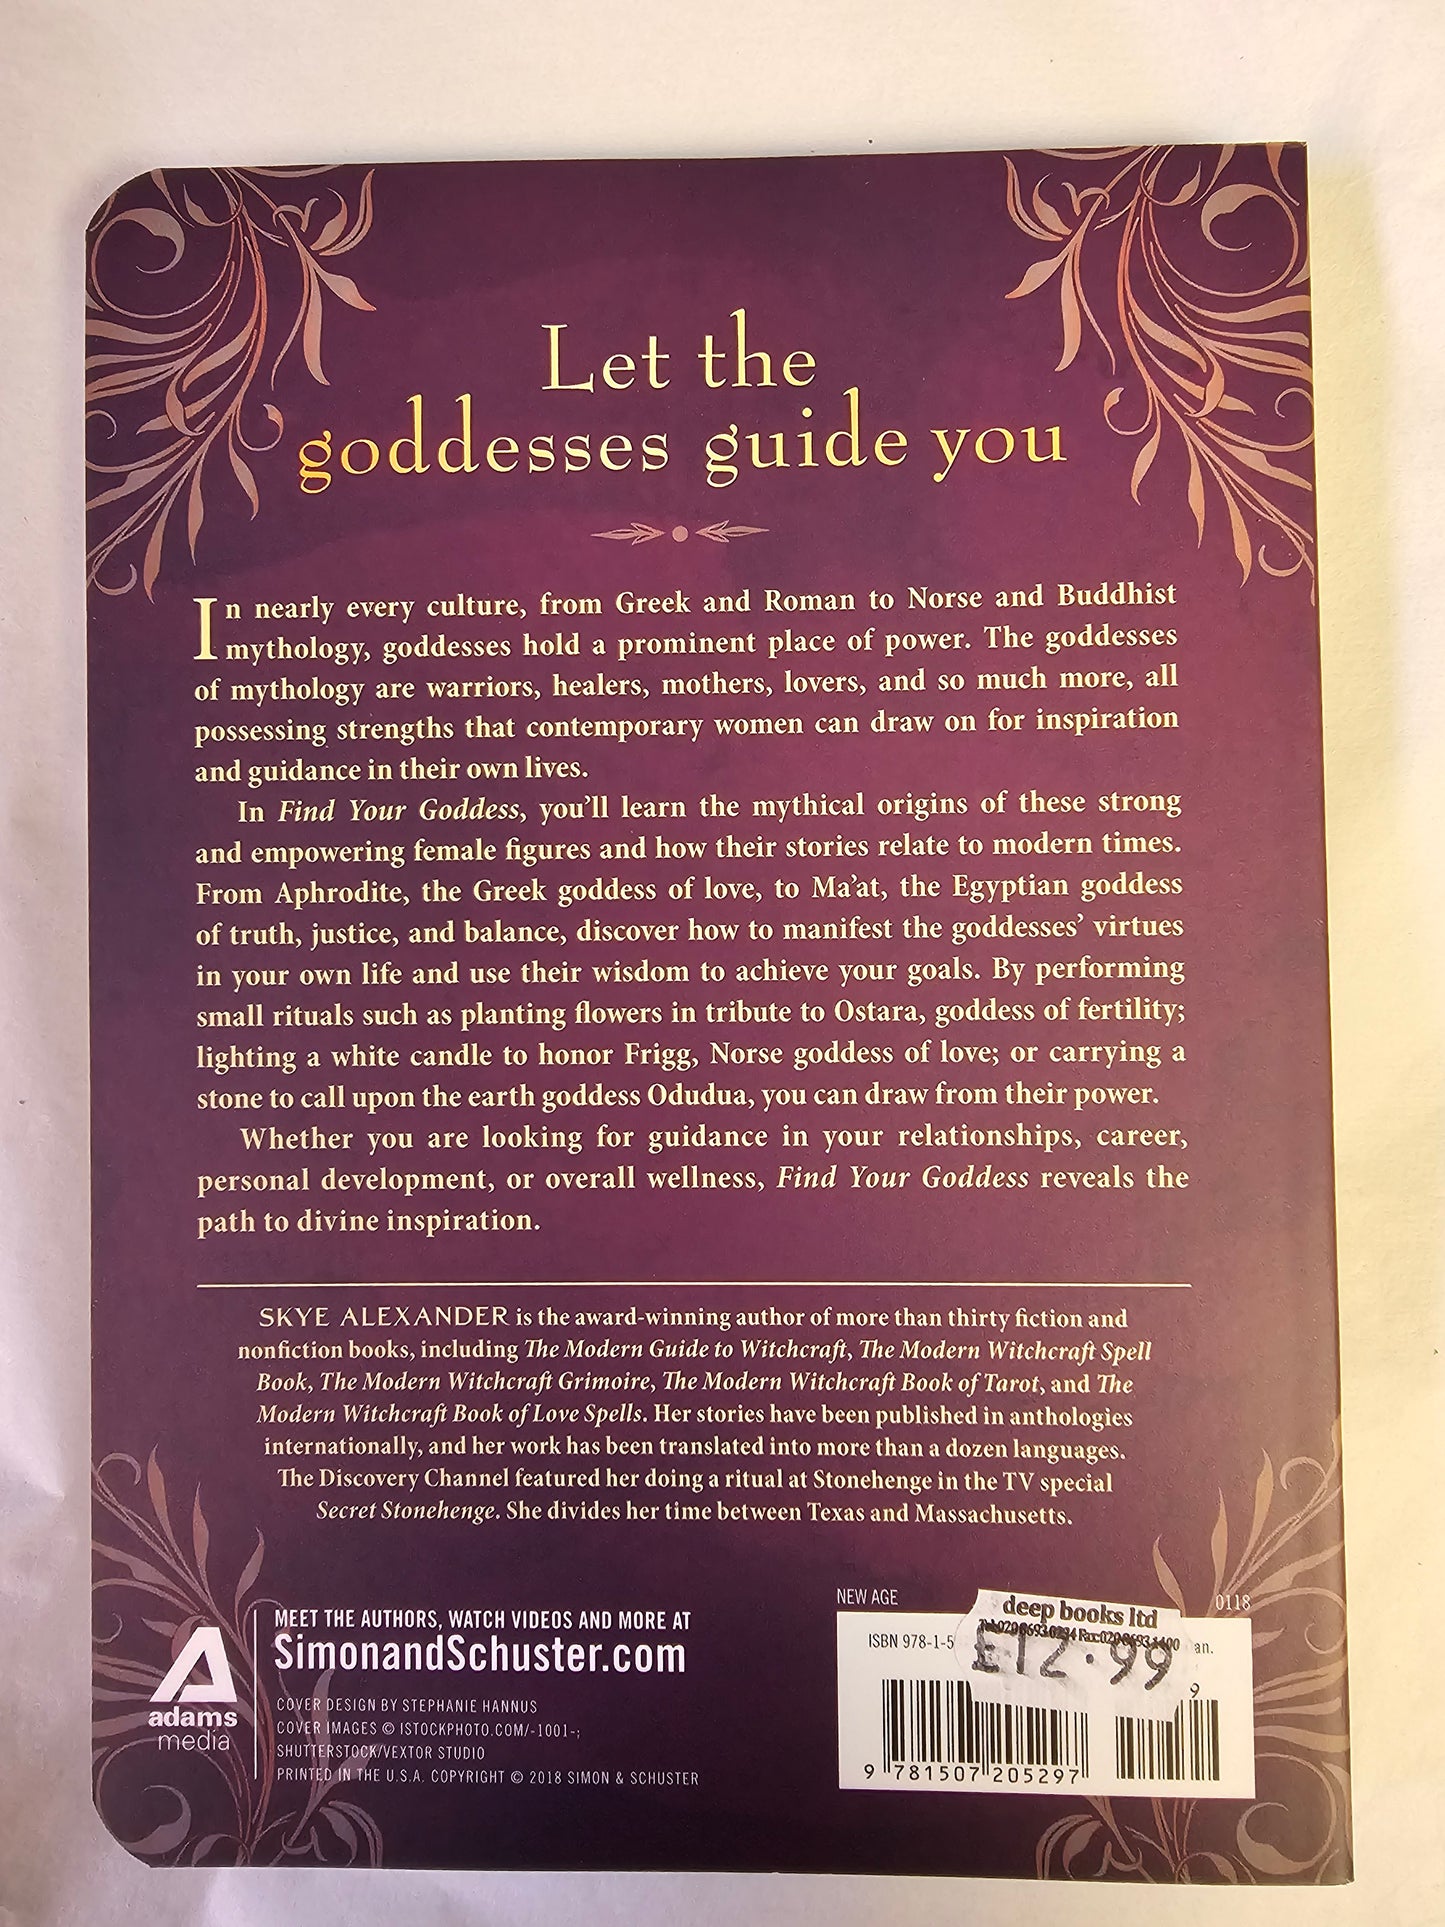 Find Your Goddess Book